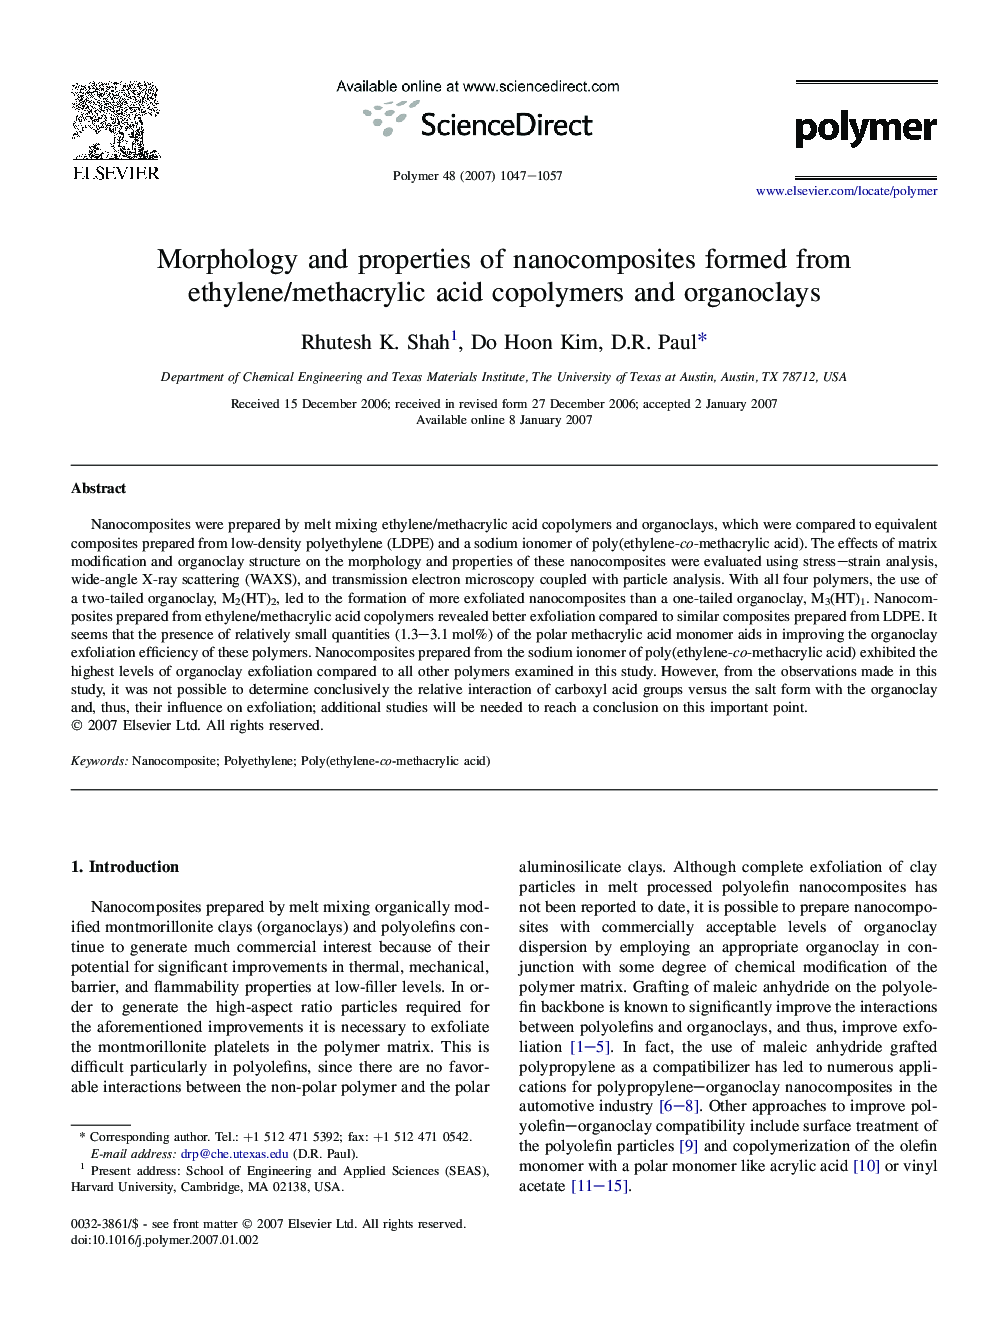 Morphology and properties of nanocomposites formed from ethylene/methacrylic acid copolymers and organoclays